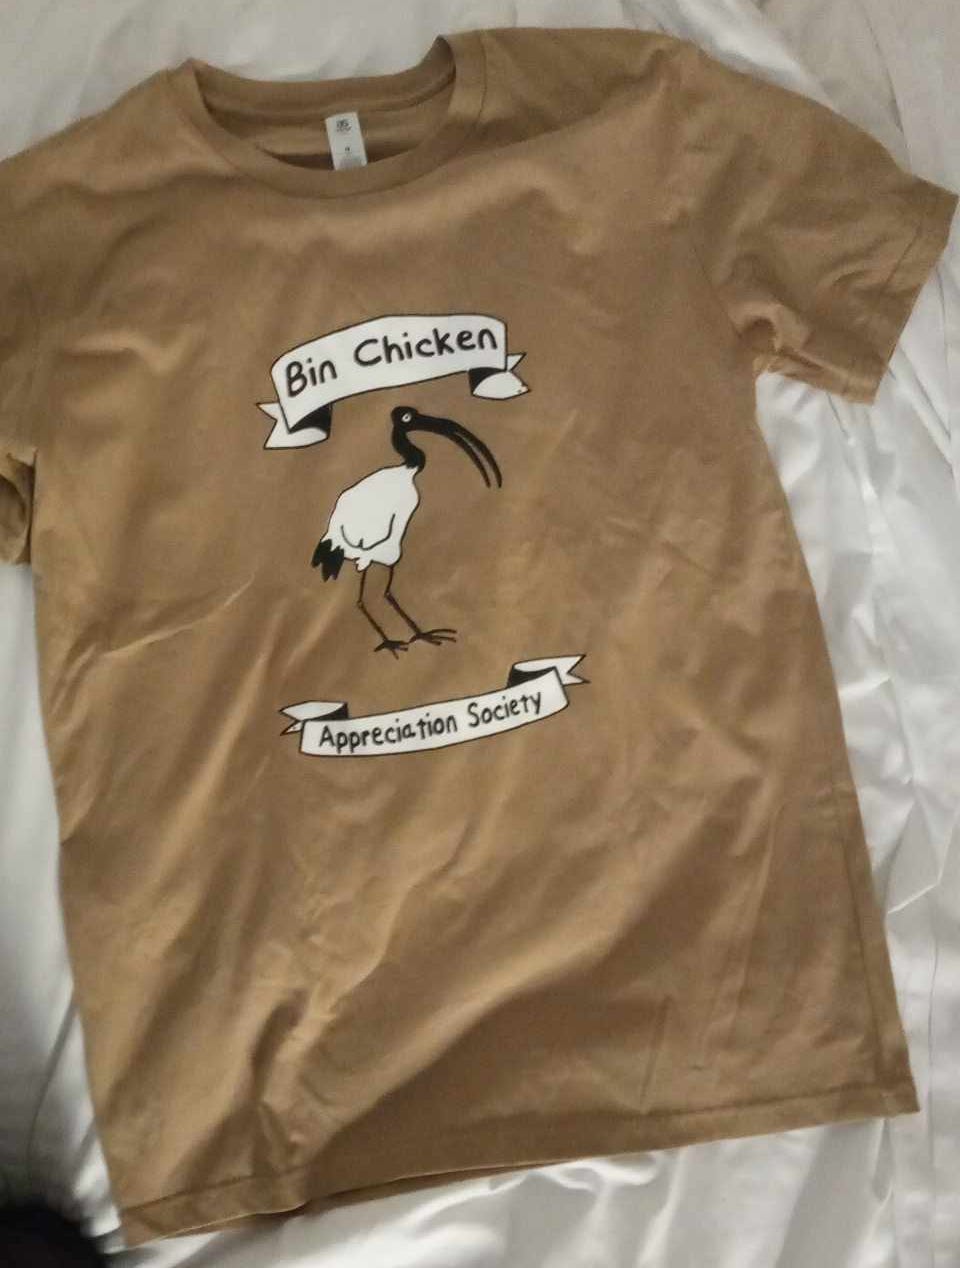 a t-shirt spread on a bed. The shirt has an image of an Ibis bird, and has banners reading "Bin Chicken Appreciation Society"